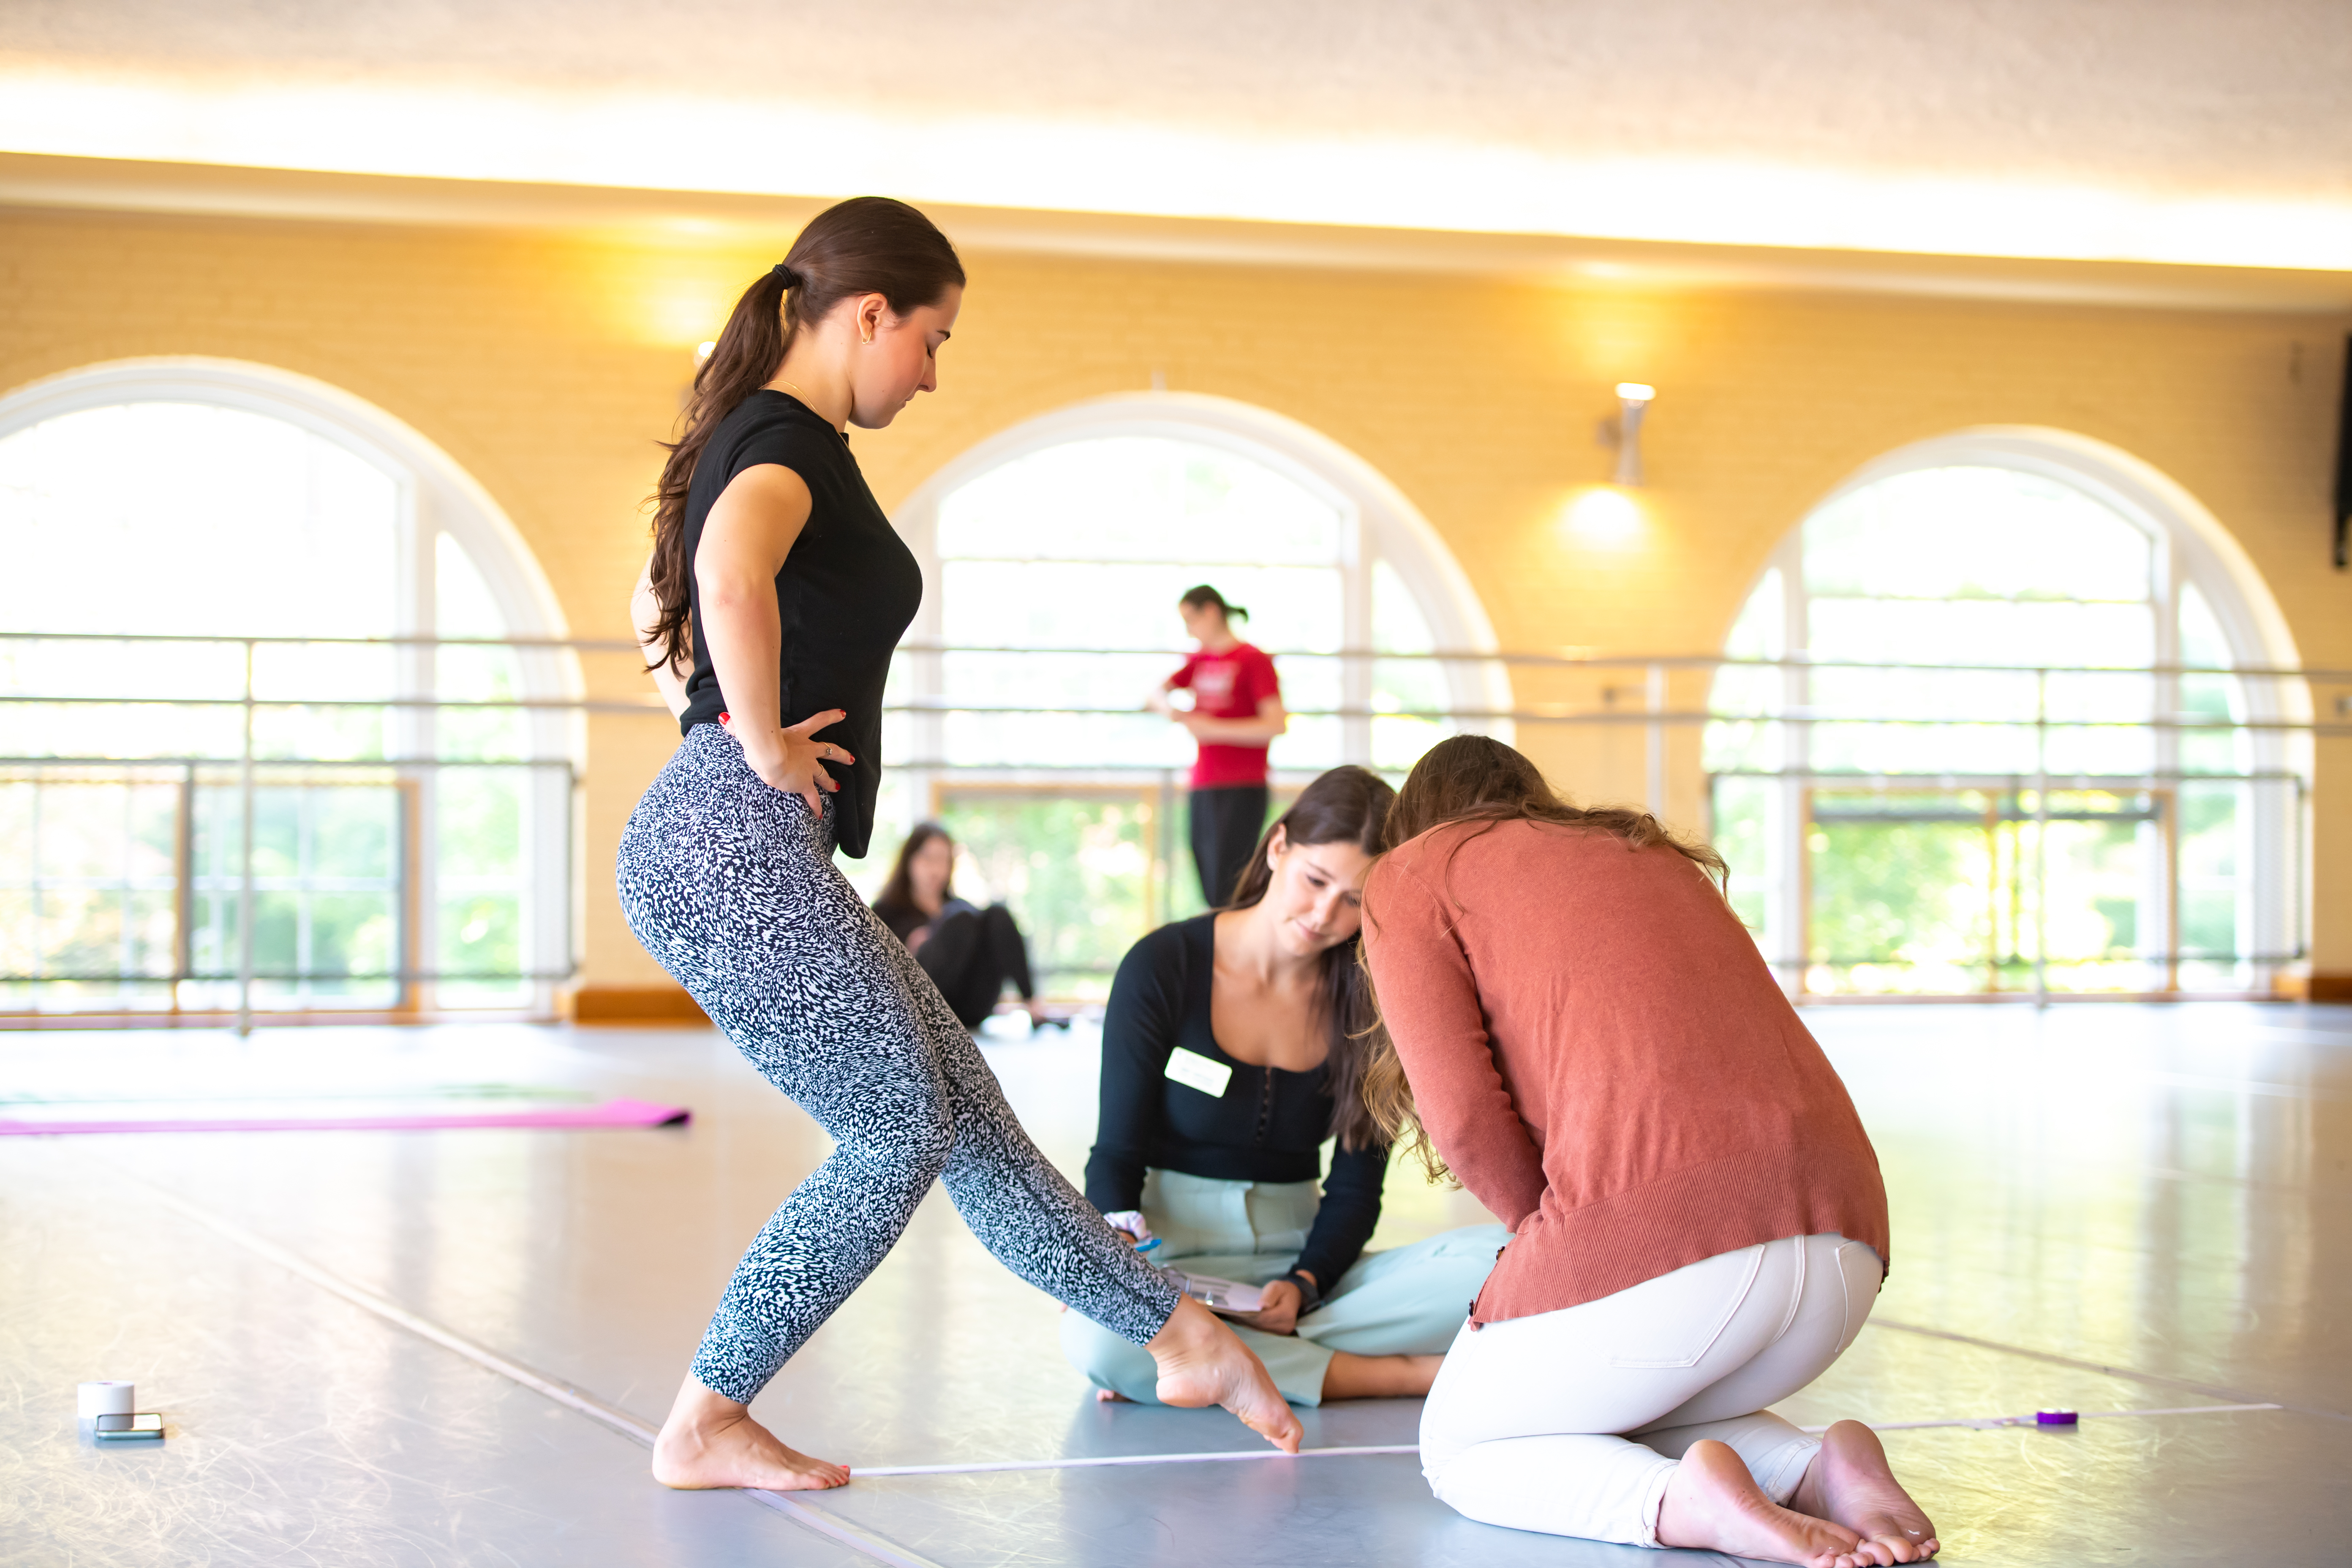 Students perform dancer assessments in the WVU Dance Studio